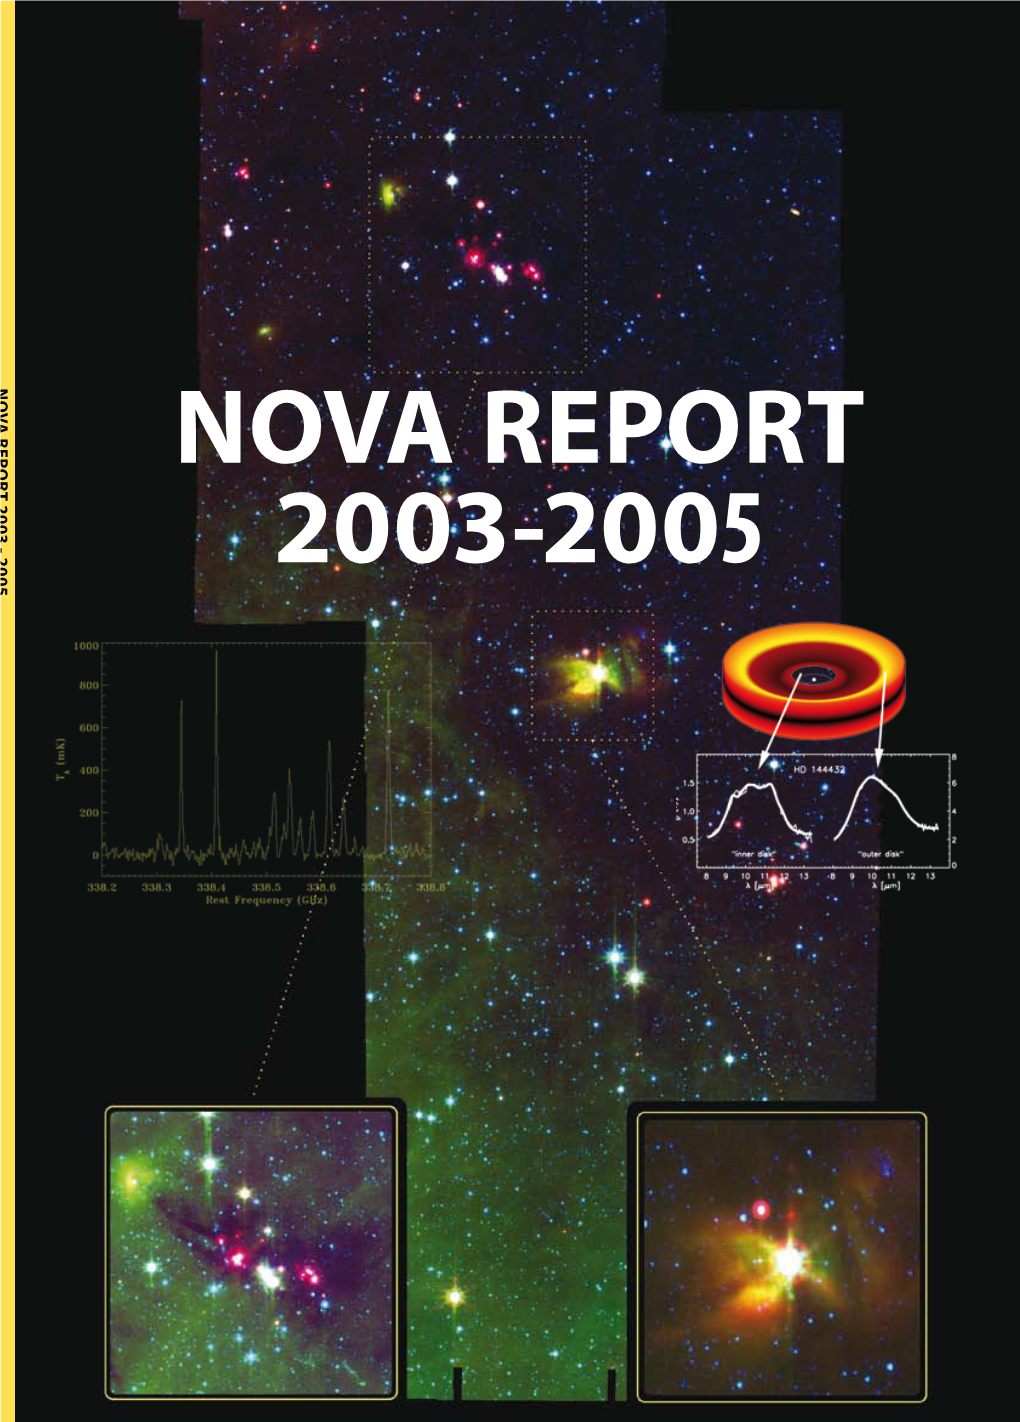 NOVA REPORT 2003-2005 Illustration on the Front Cover